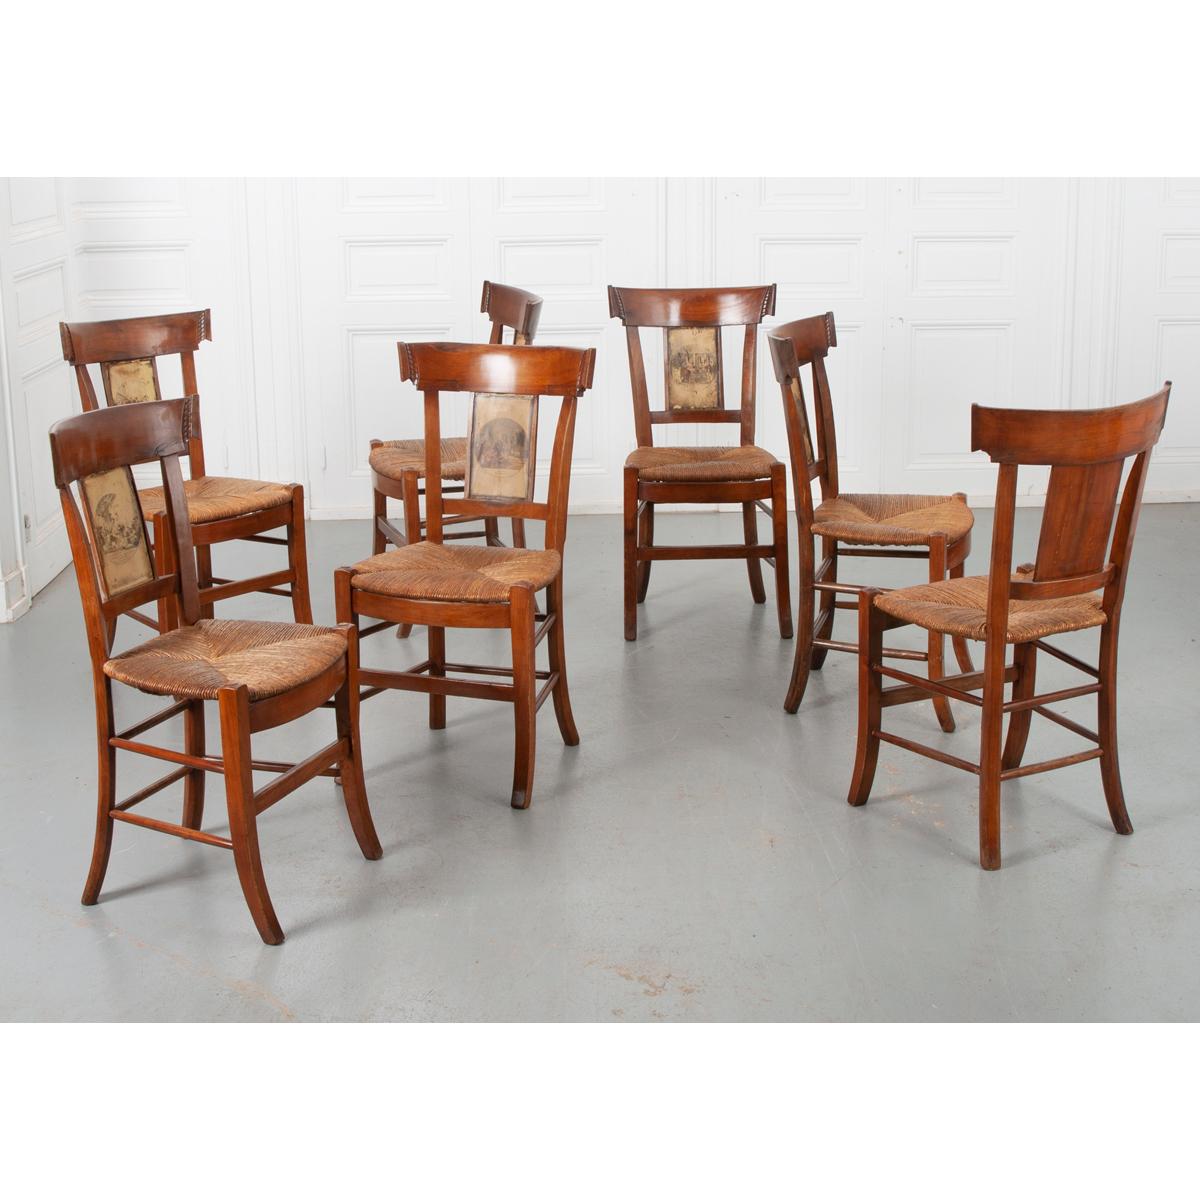 Set of 7 Fruitwood Rush Seat Chairs 6